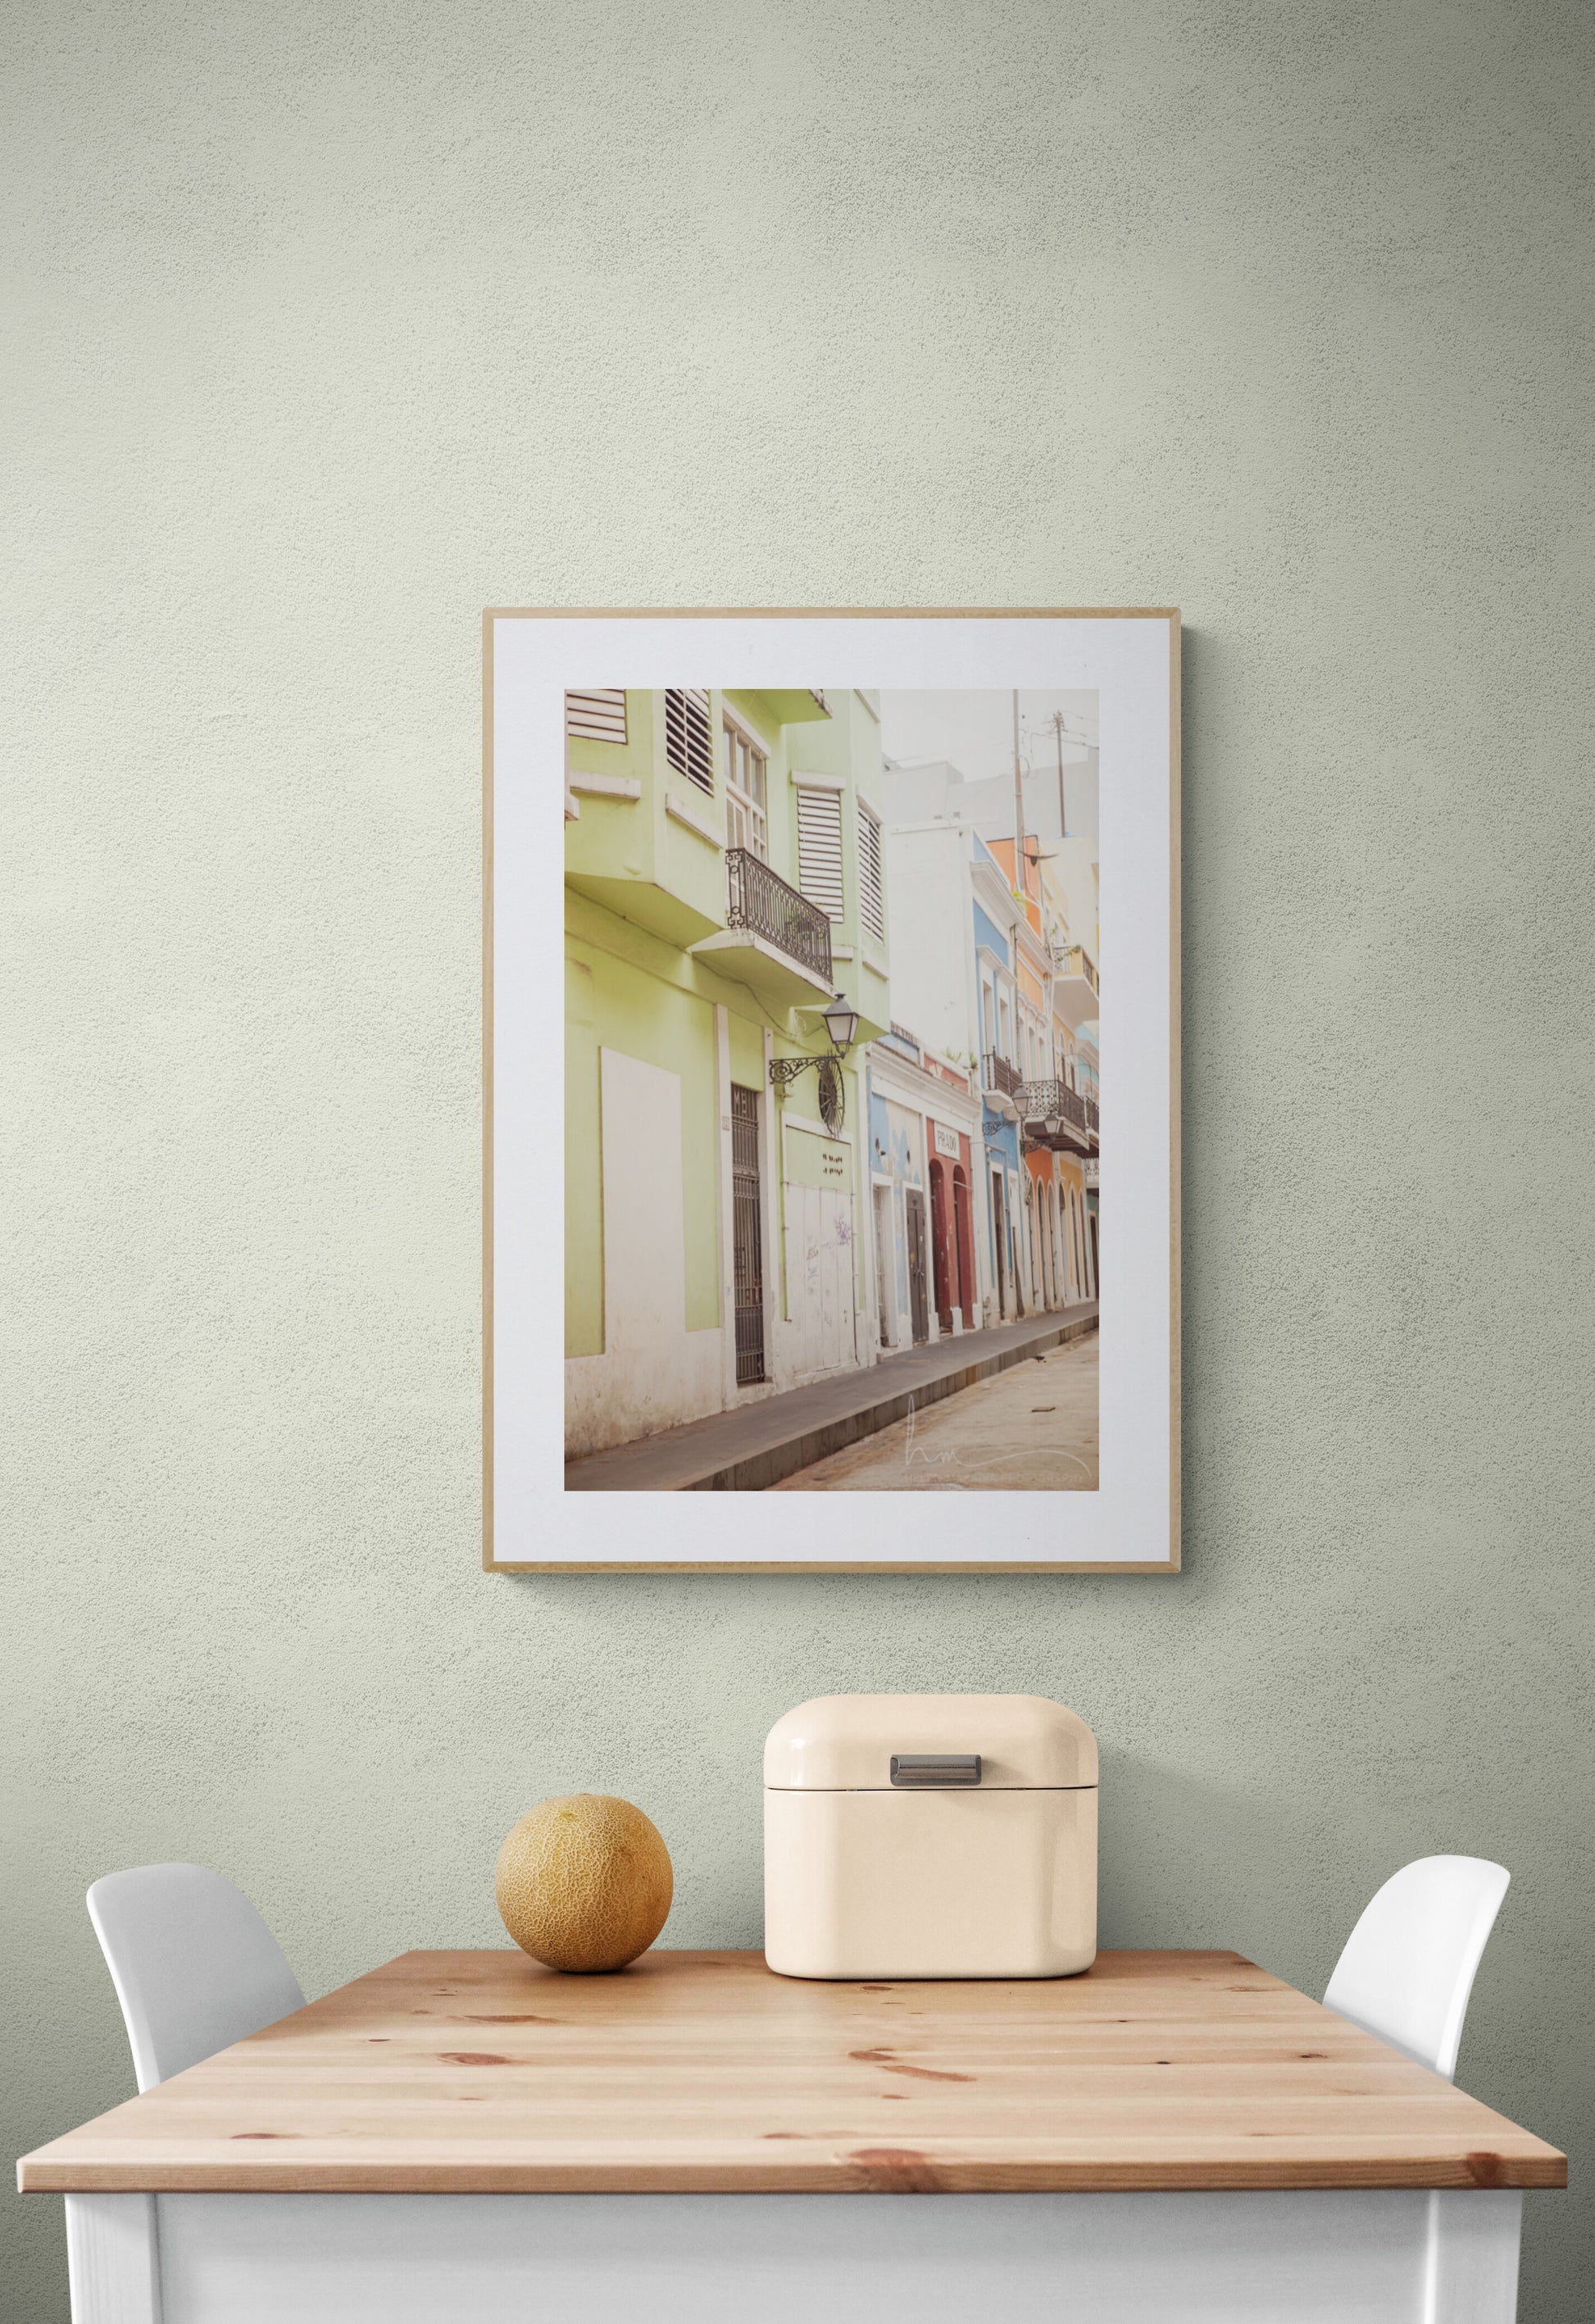 Framed Photograph of the Street of Old San Juan Puerto Rico in a kitchen